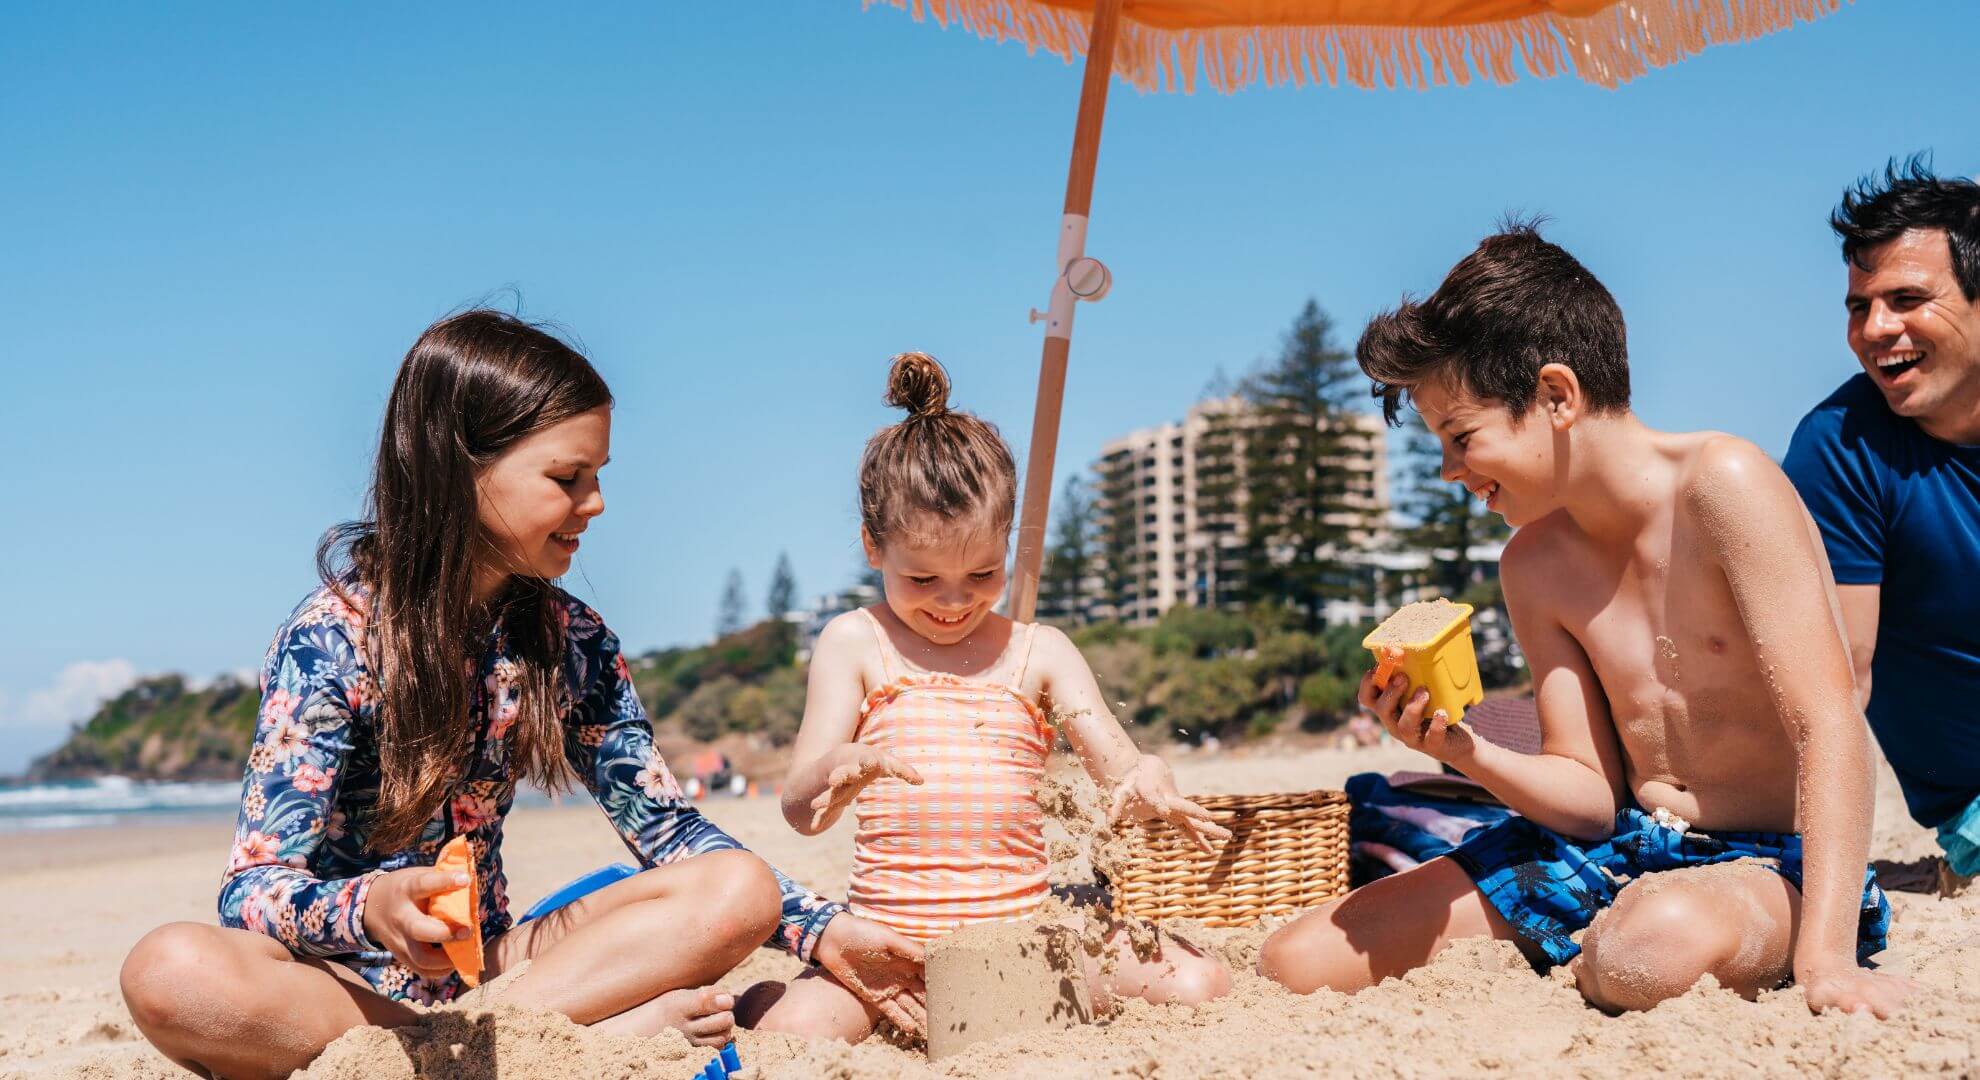 Sunshine Coast offering a warm welcome to school holiday visitors